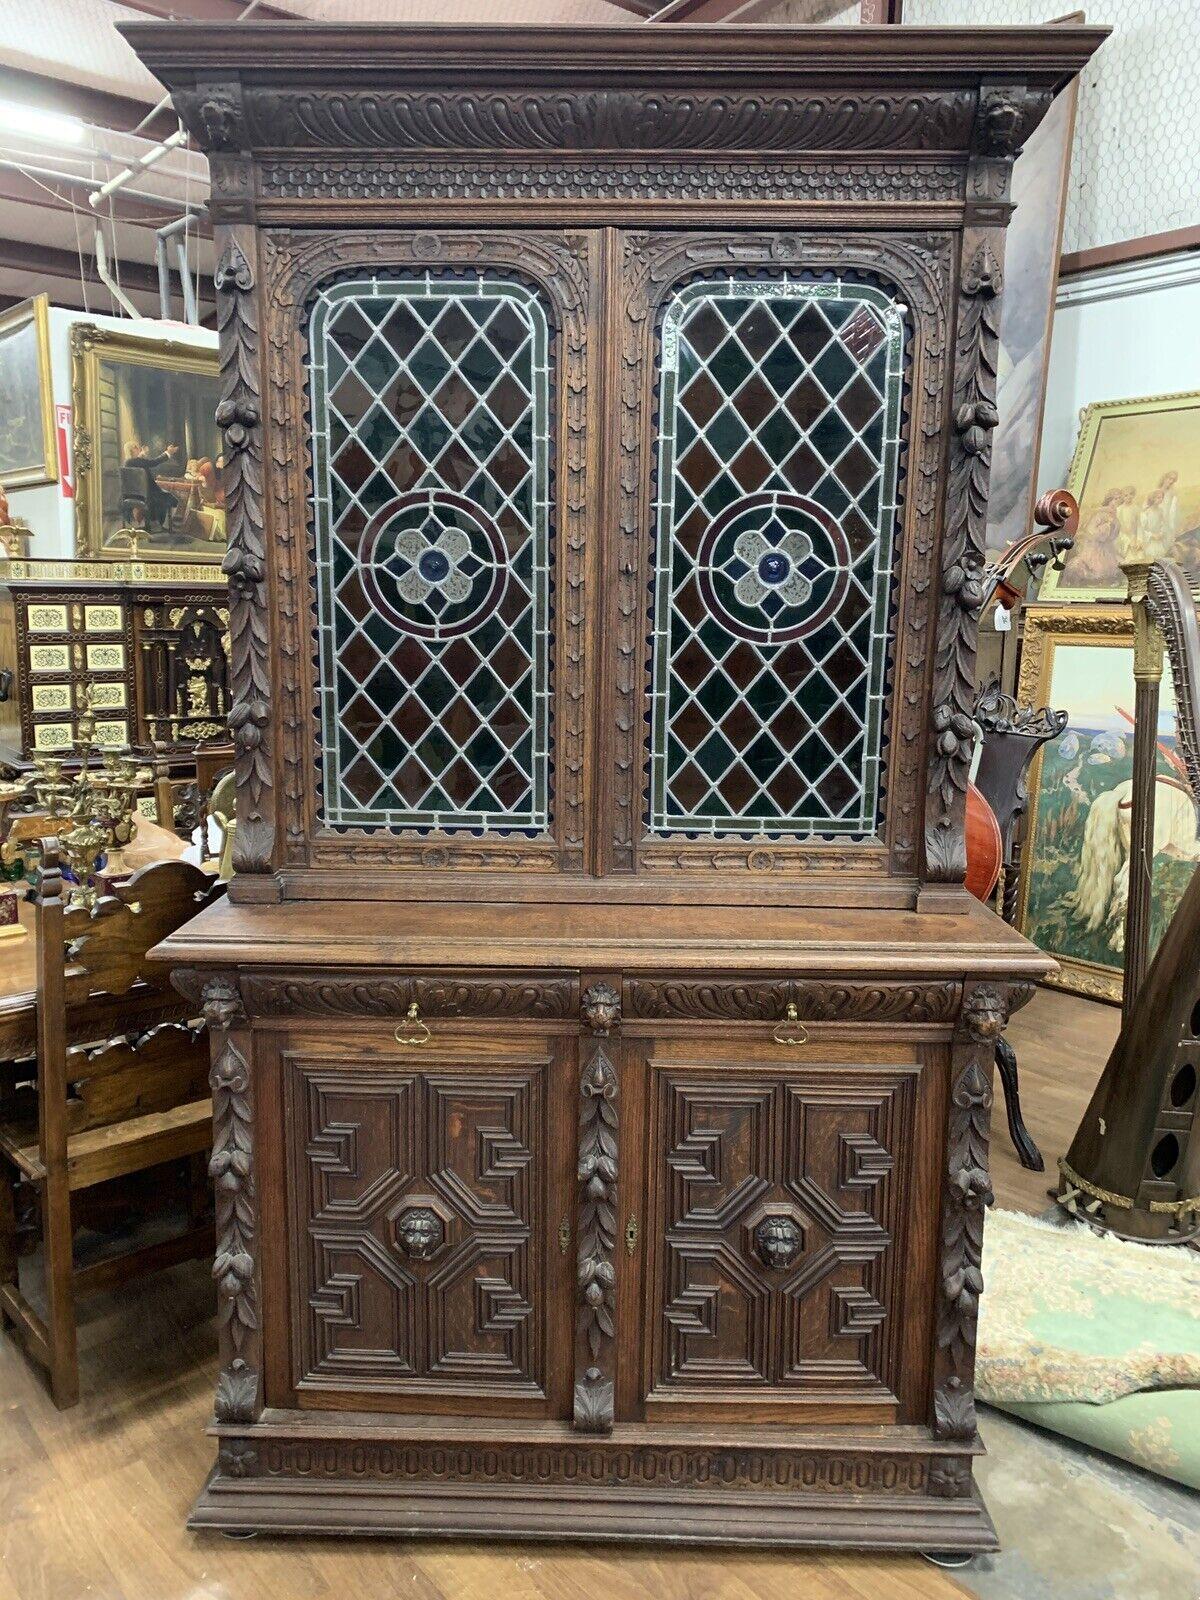 Gorgeous antique sideboard, Buffet Server, Dutch stained glass sideboard, Foliage, 1800s! Dutch stained glass sideboard, 19th century, 1800', with key included!! 

This antique Dutch sideboard is a stunning piece of furniture from the 1800s. It